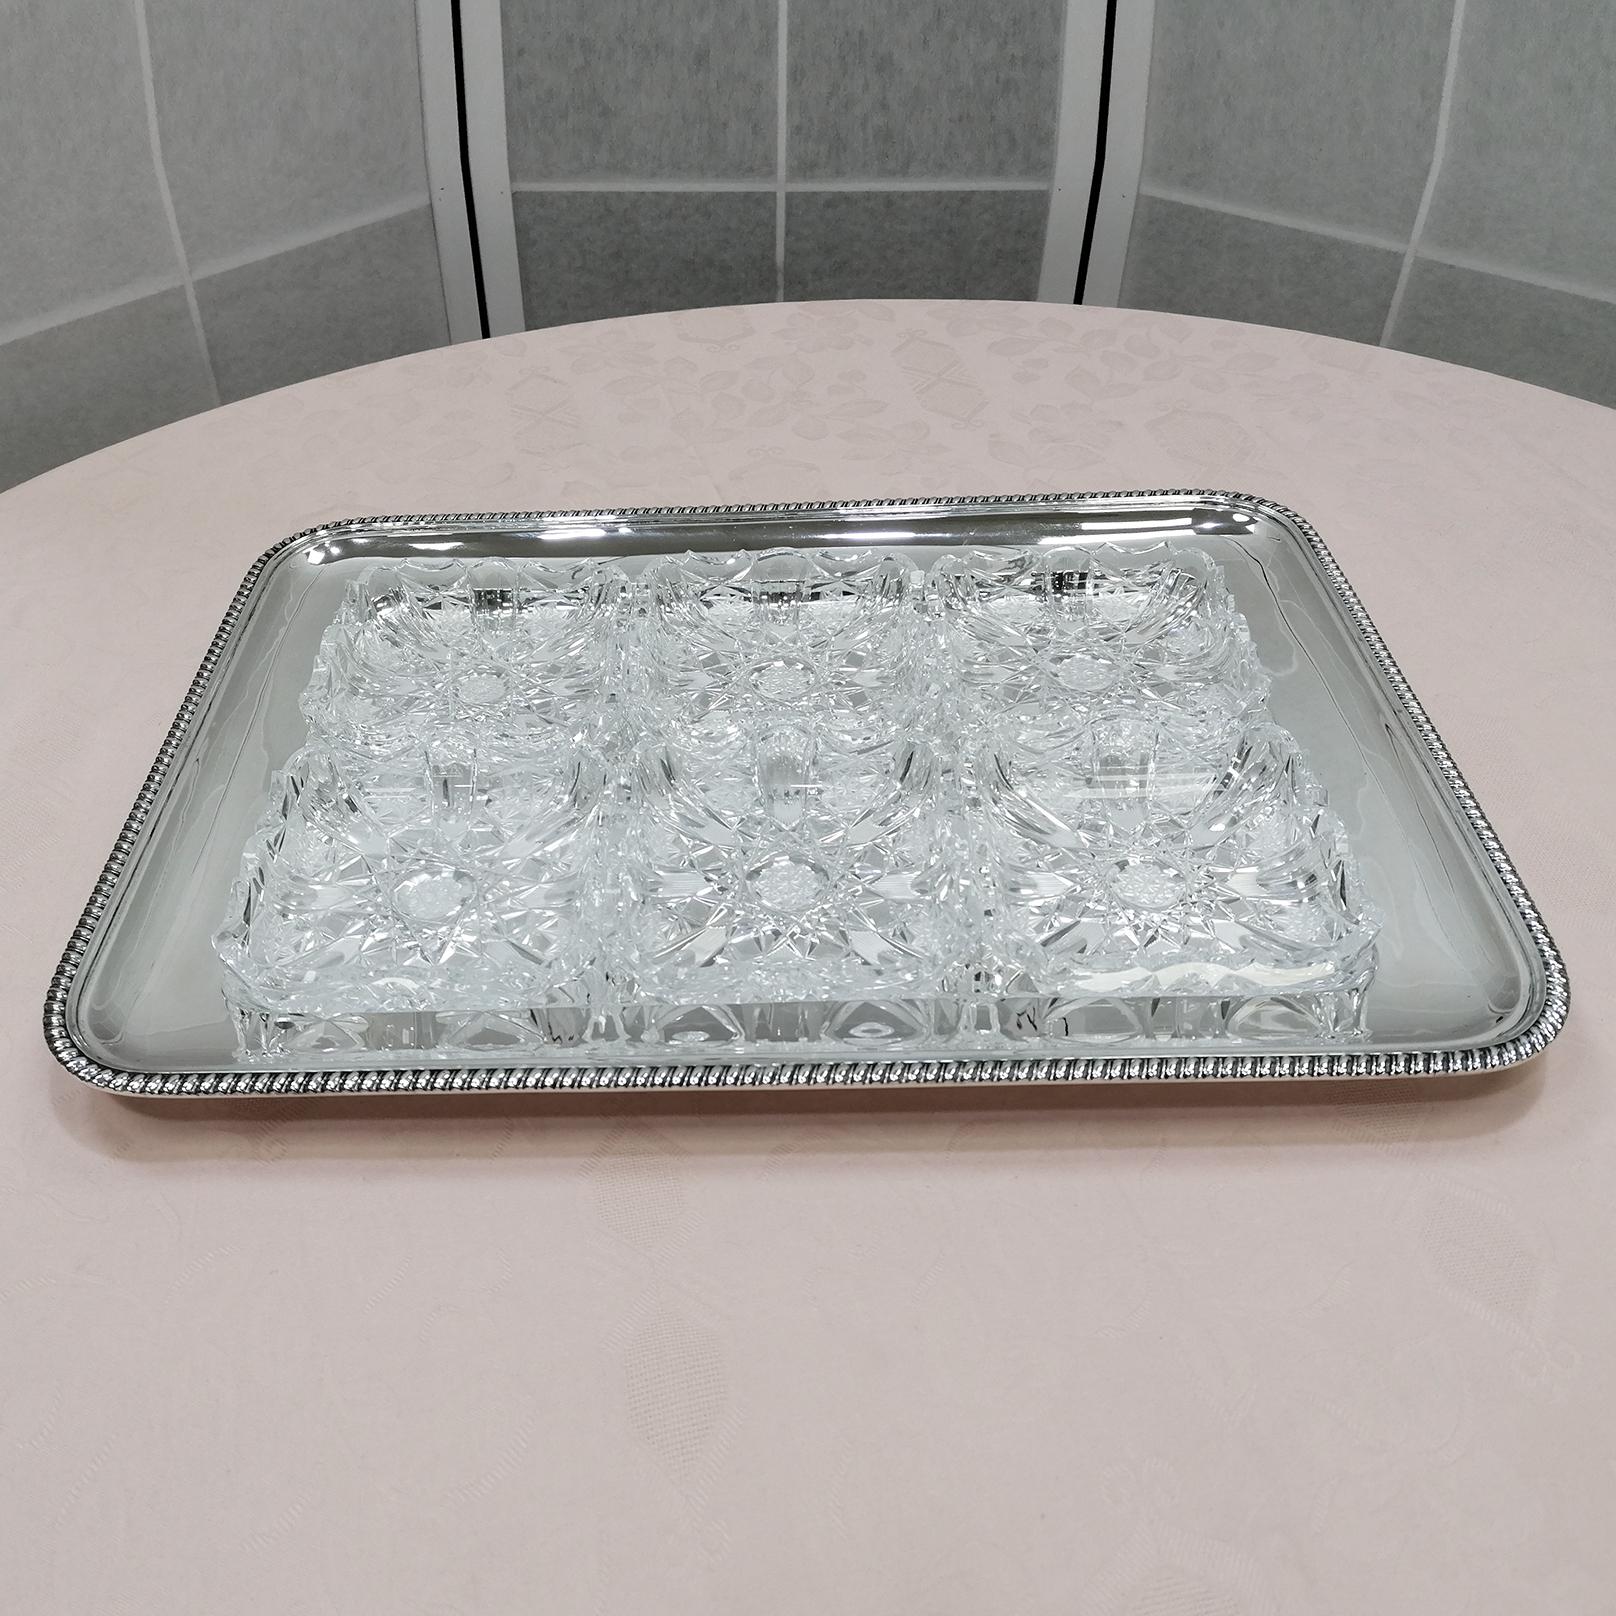 Rectangular tray in solid 800 silver with 6 removable crystals for different types of appetizers.
The tray is smooth with a welded edge with a rope design.
The original crystals of the time are hand-cut and fit perfectly into the hollow of the